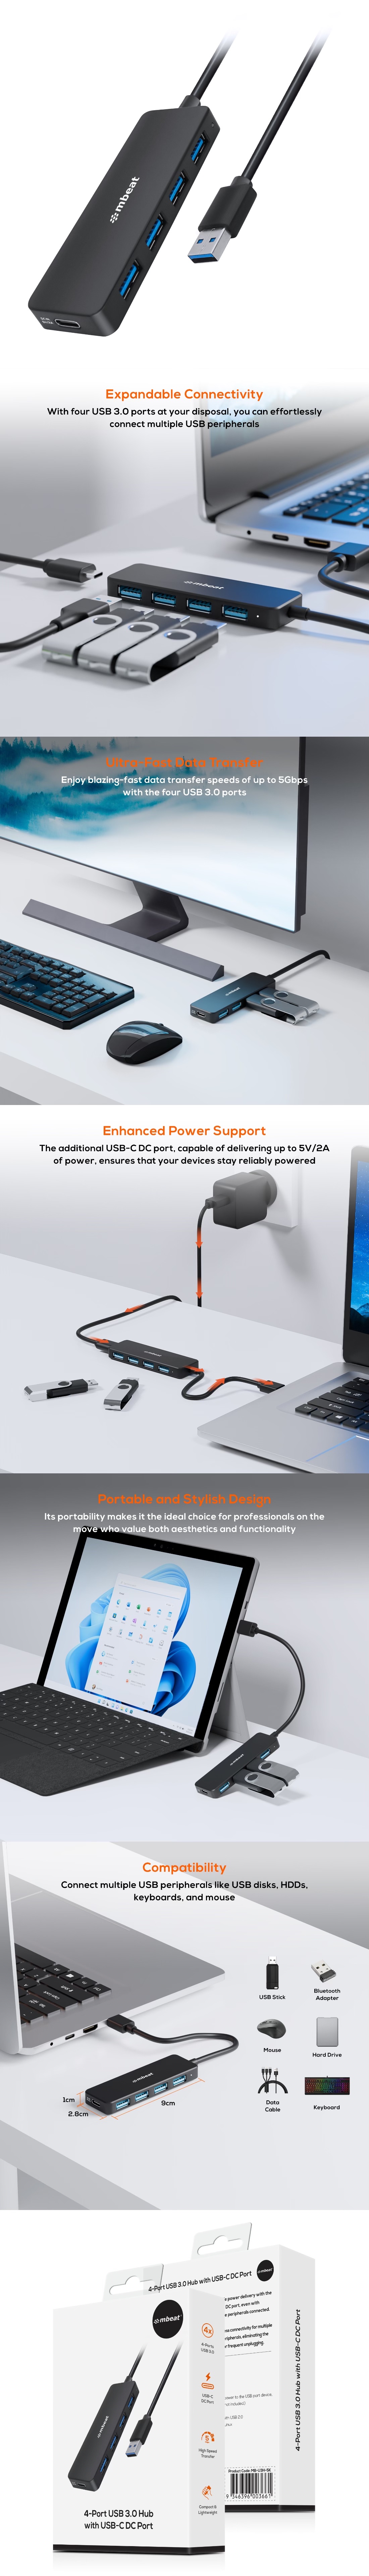 A large marketing image providing additional information about the product mBeat 4-Port USB-A 3.0 Hub with DC Port - Additional alt info not provided